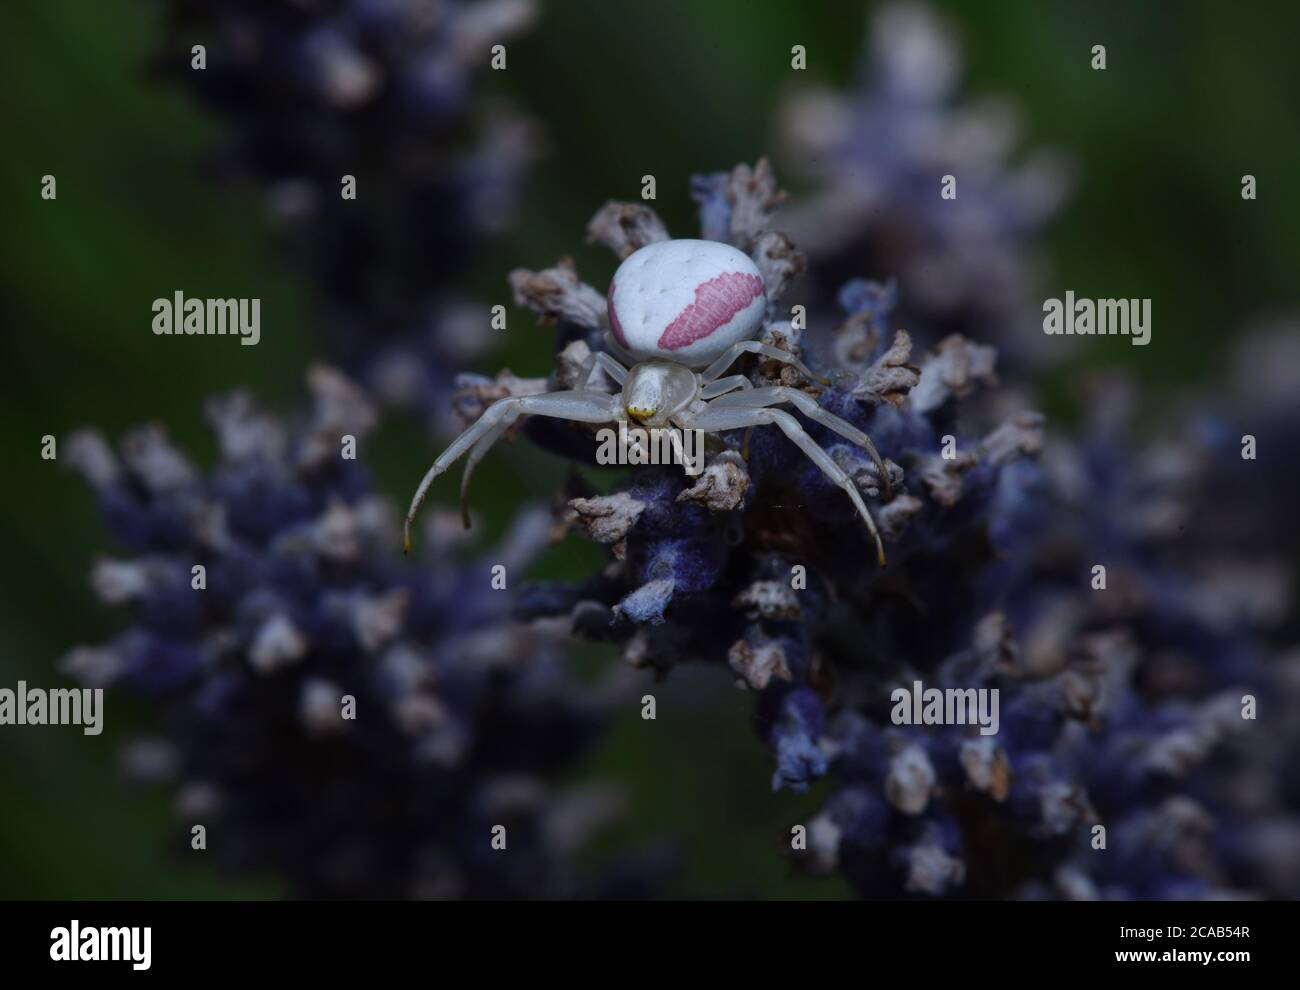 A Golden-rod Crab Spider (Misumena vatia) sits among the purple blossoms of a lavender plant in Victoria, British Columbia, Canada on Vancouver island Stock Photo